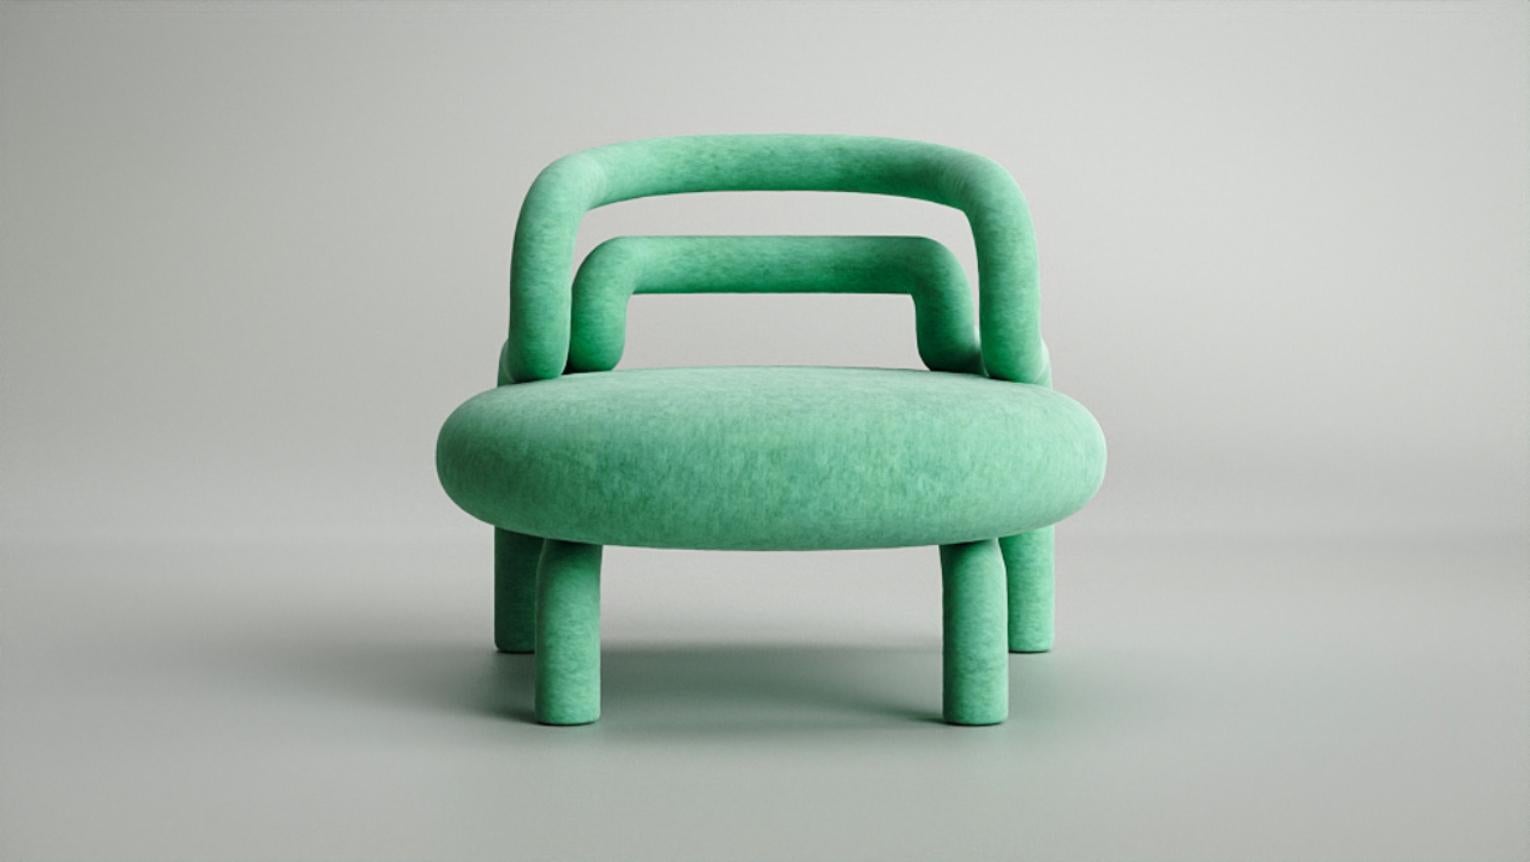 Chloropast contemporary armchair by Taras Zheltyshev
Dimensions: 69 x 78 x 78 cm
69 x 78 x 78 cm

The Chloroplast chair chair is an interior item that recreates one of the most important plant cells in a playful form. Chloroplast performs the